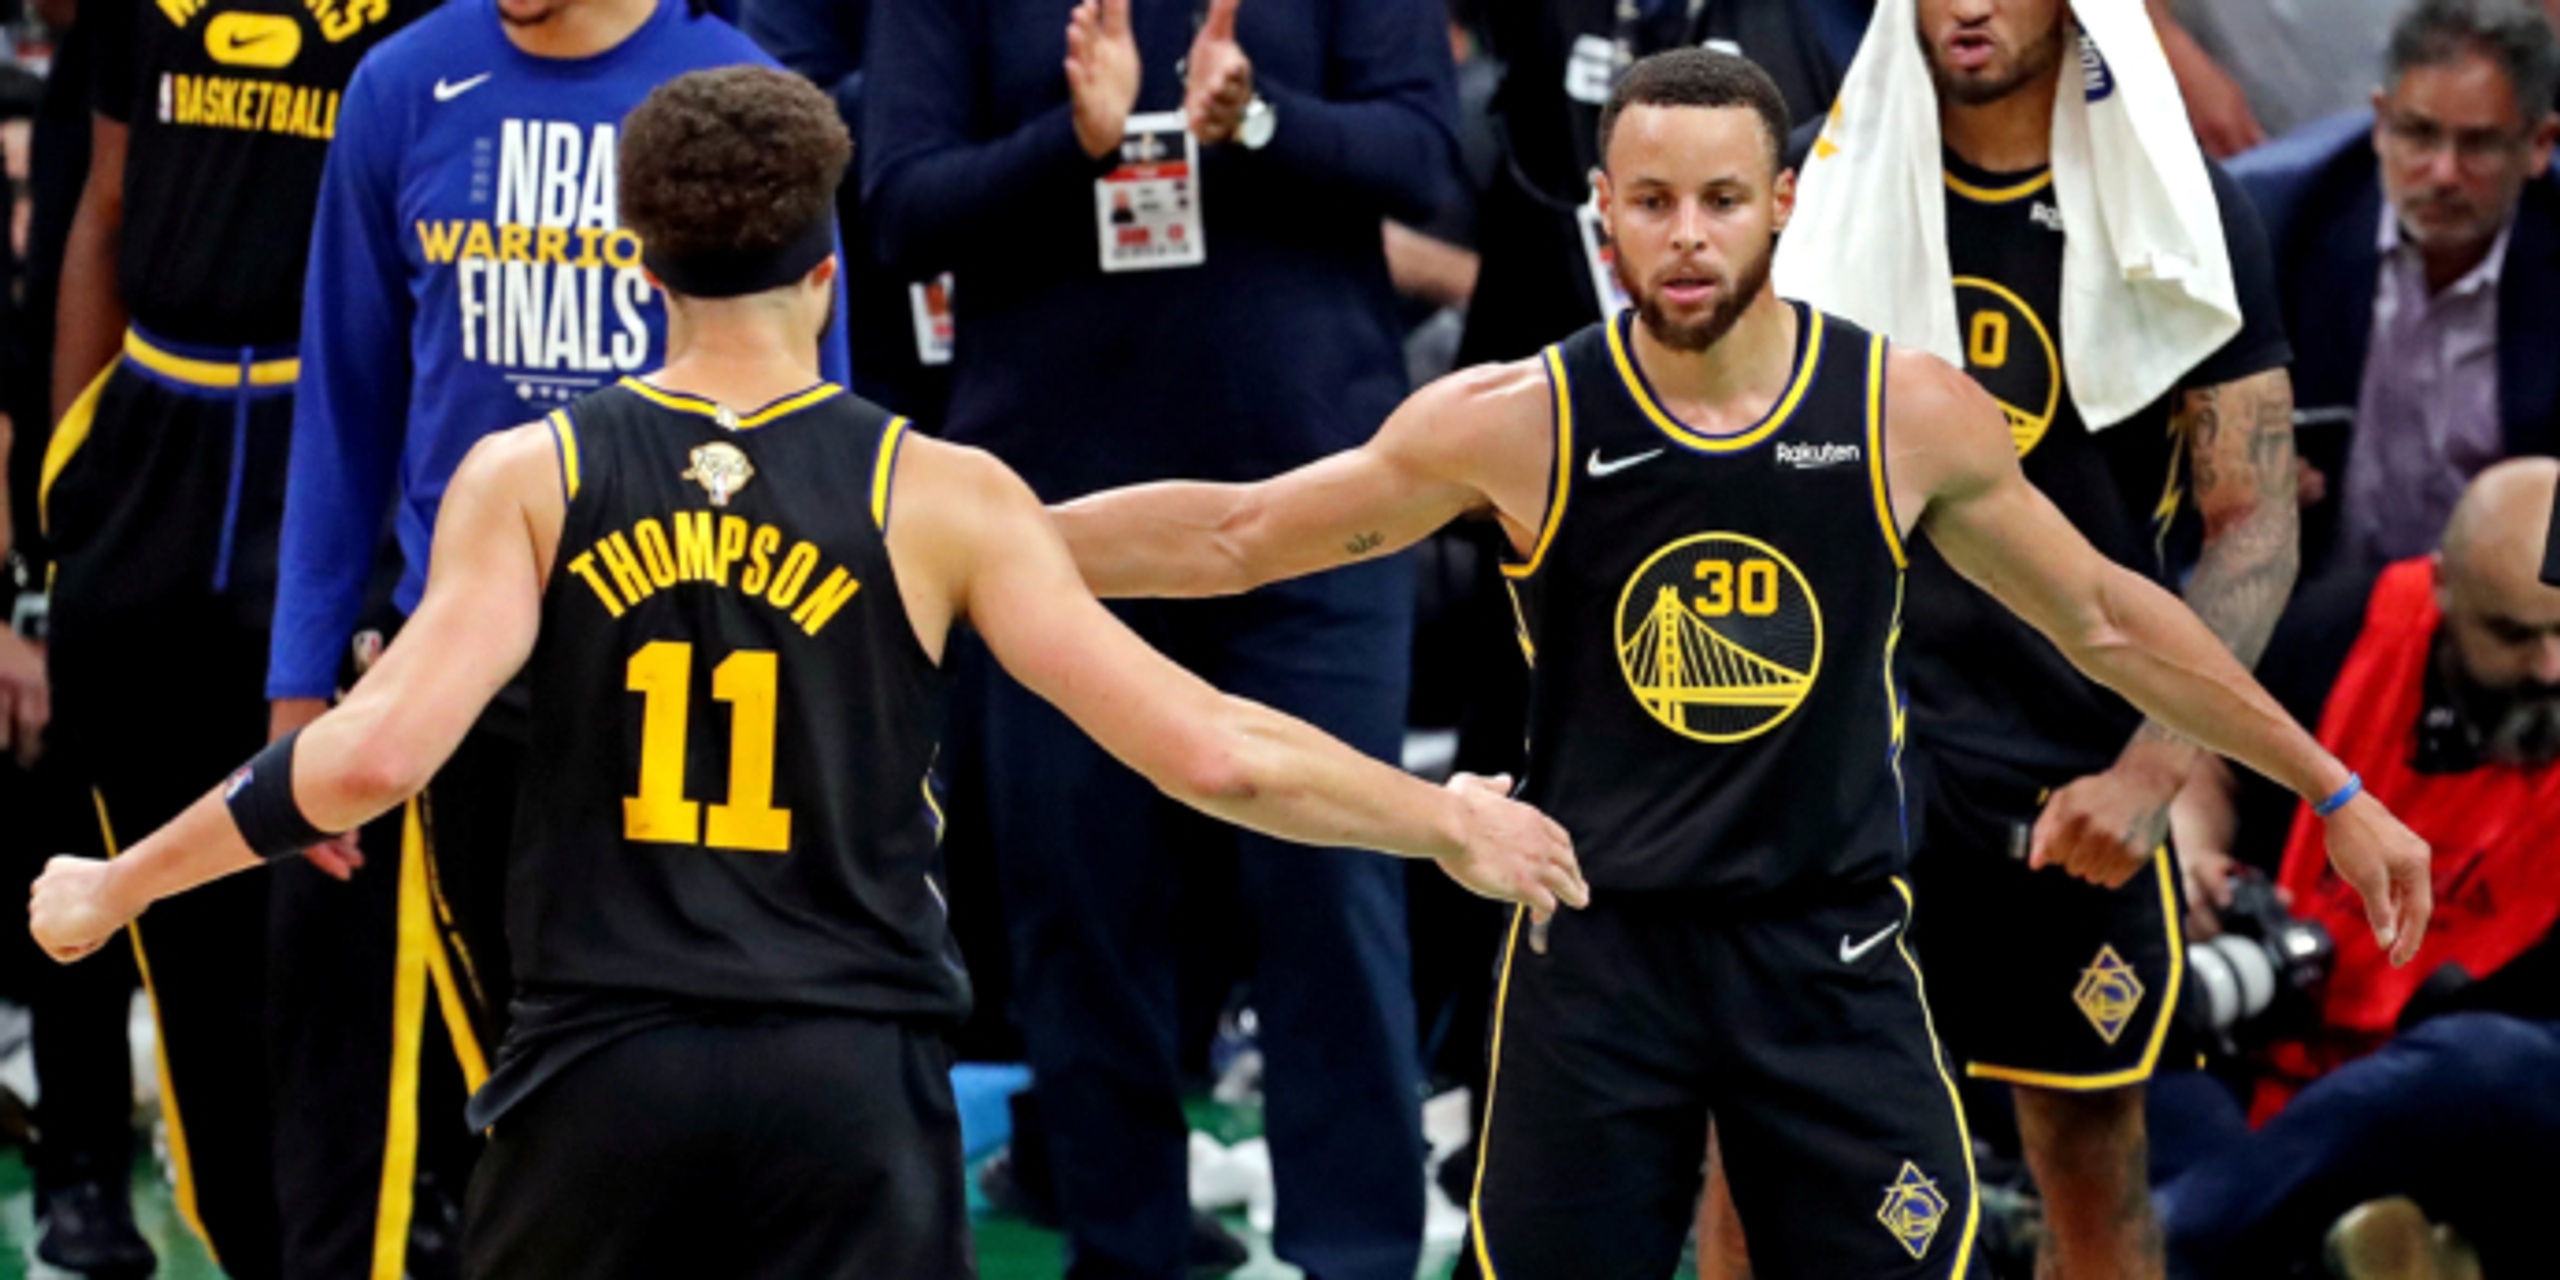 Turnovers doom Celtics once again, as Warriors win Game 4 of NBA Finals